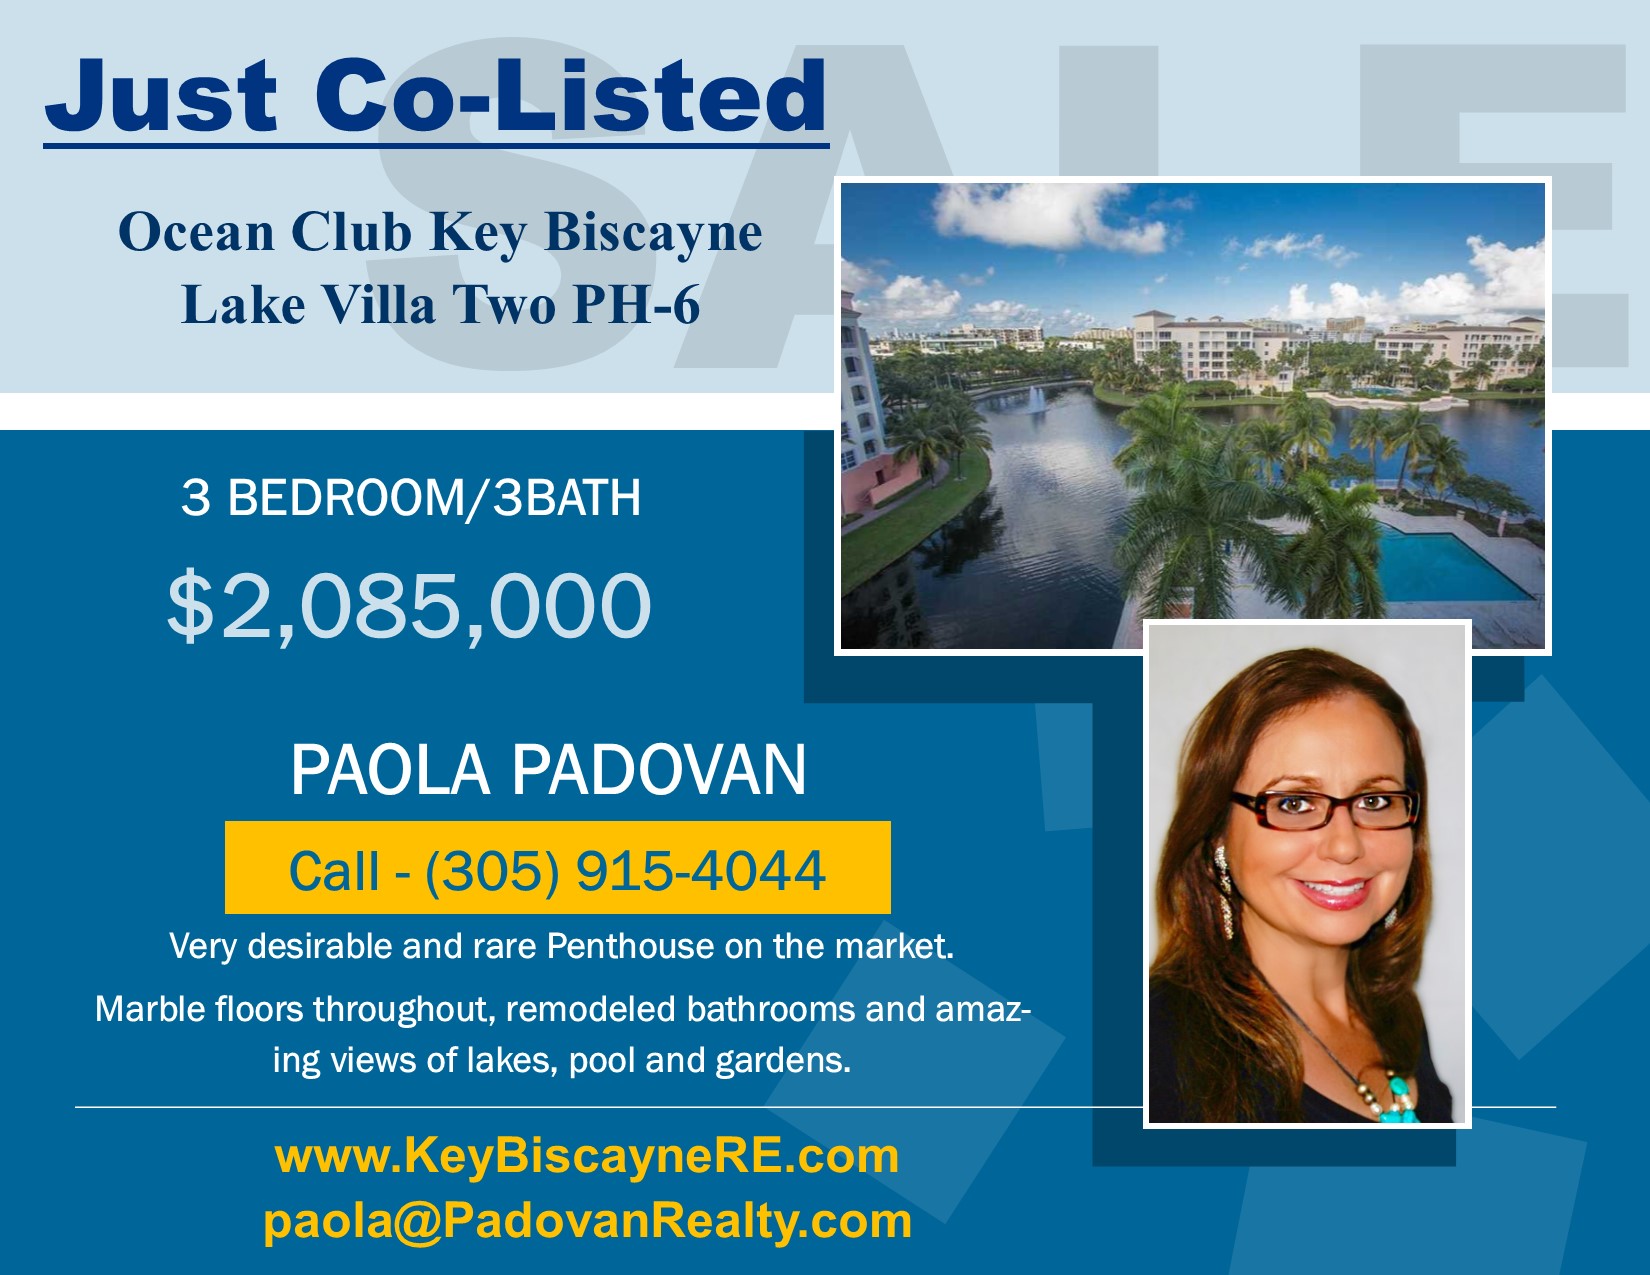 JUST CO-LISTED IN OCEAN CLUB KEY BISCAYNE!!!